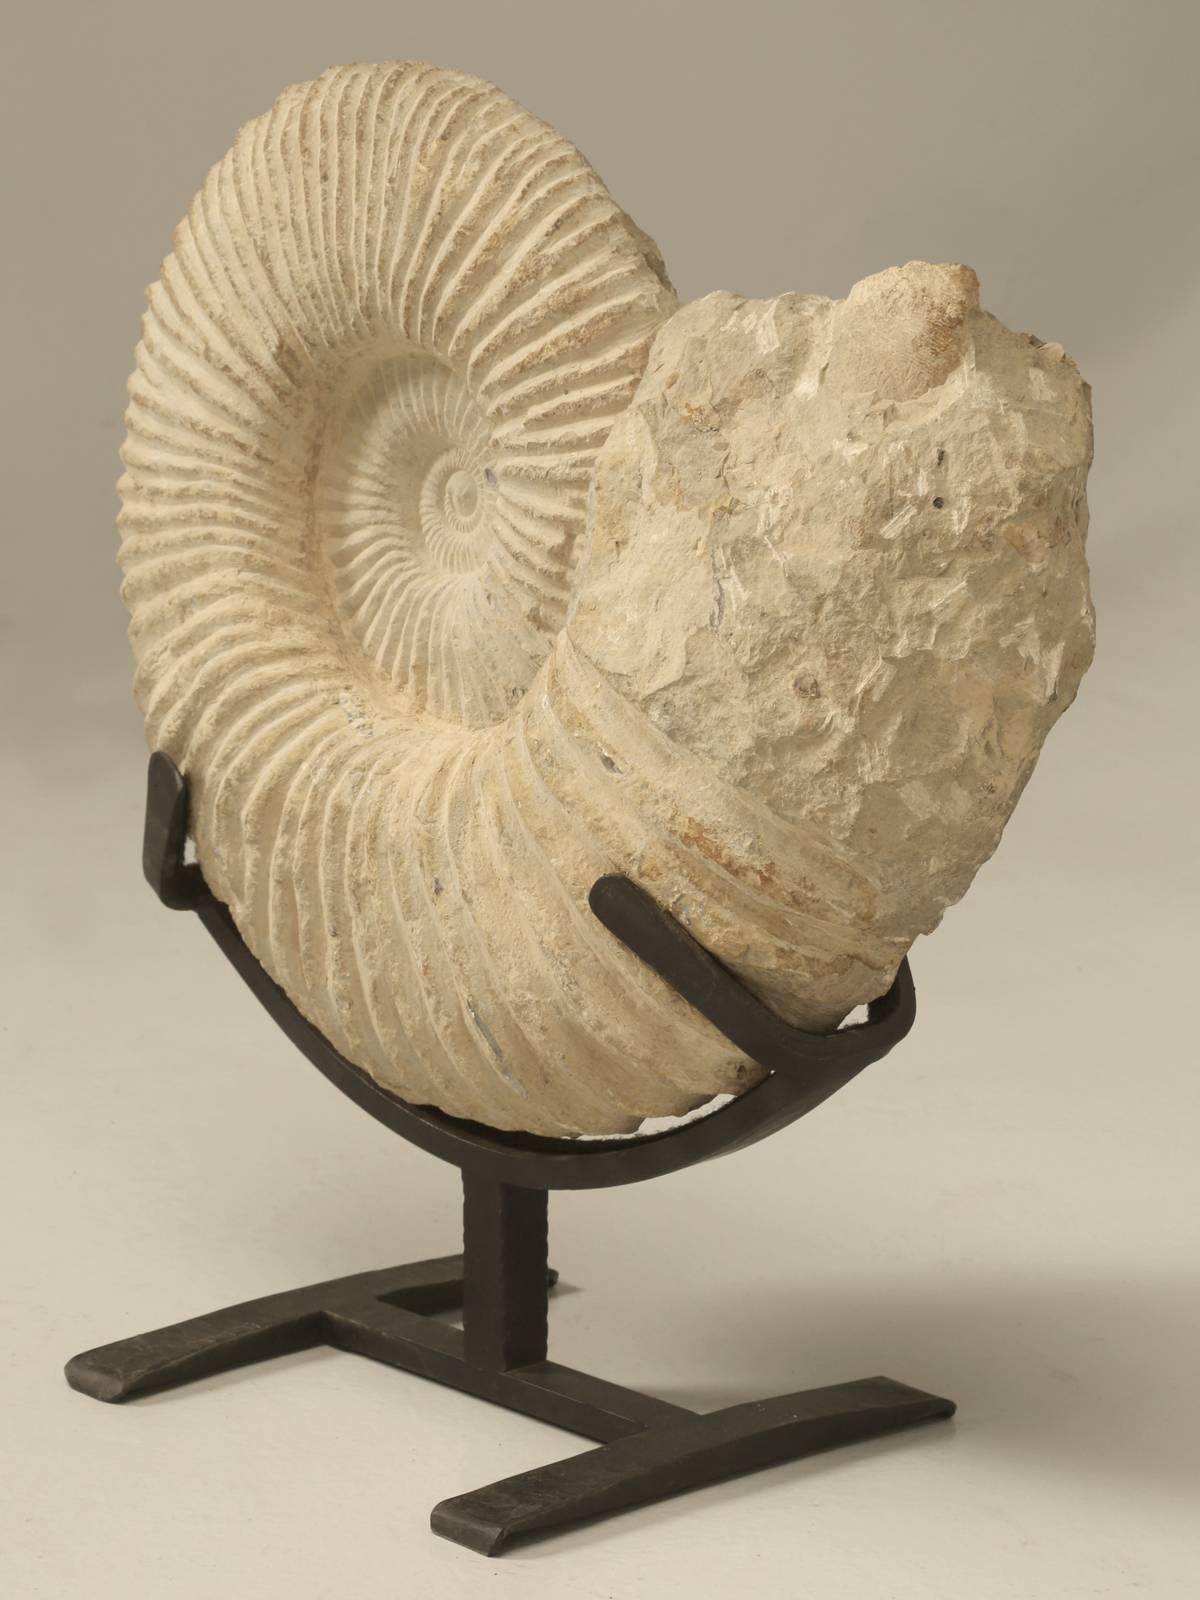 Ammonites began surfacing during the Mid-Devonian period roughly 400 million years ago, that were mollusks, with tightly coiled shells on a single plane and known as Homomorphs. They matured and increased in size, chambers were added at the opening.